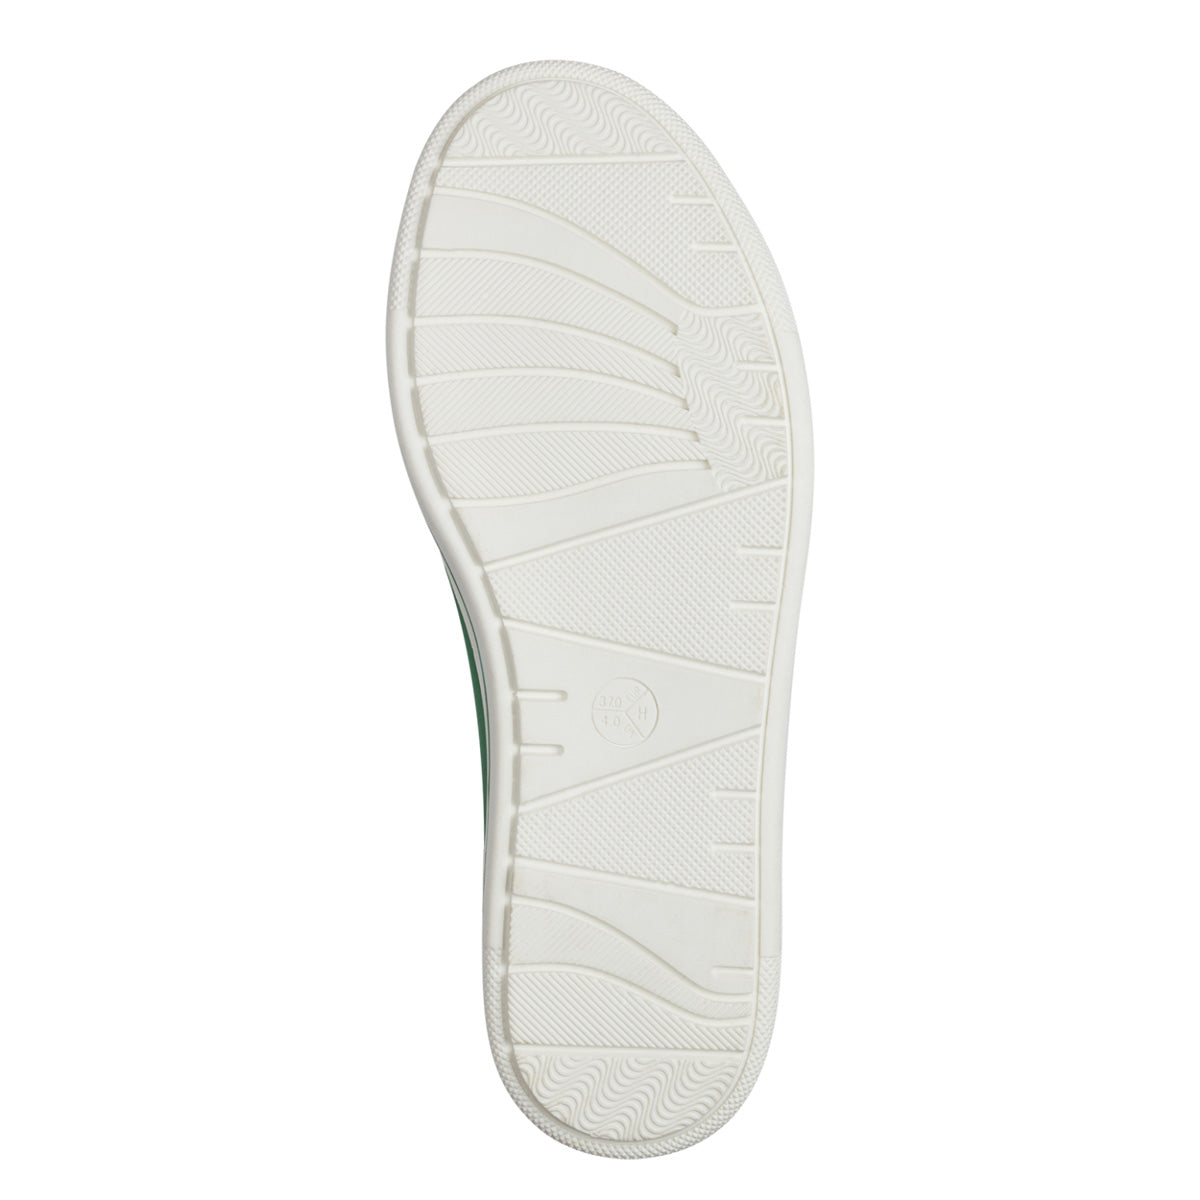 Sole view presenting the eco-friendly, contrasting outsole.